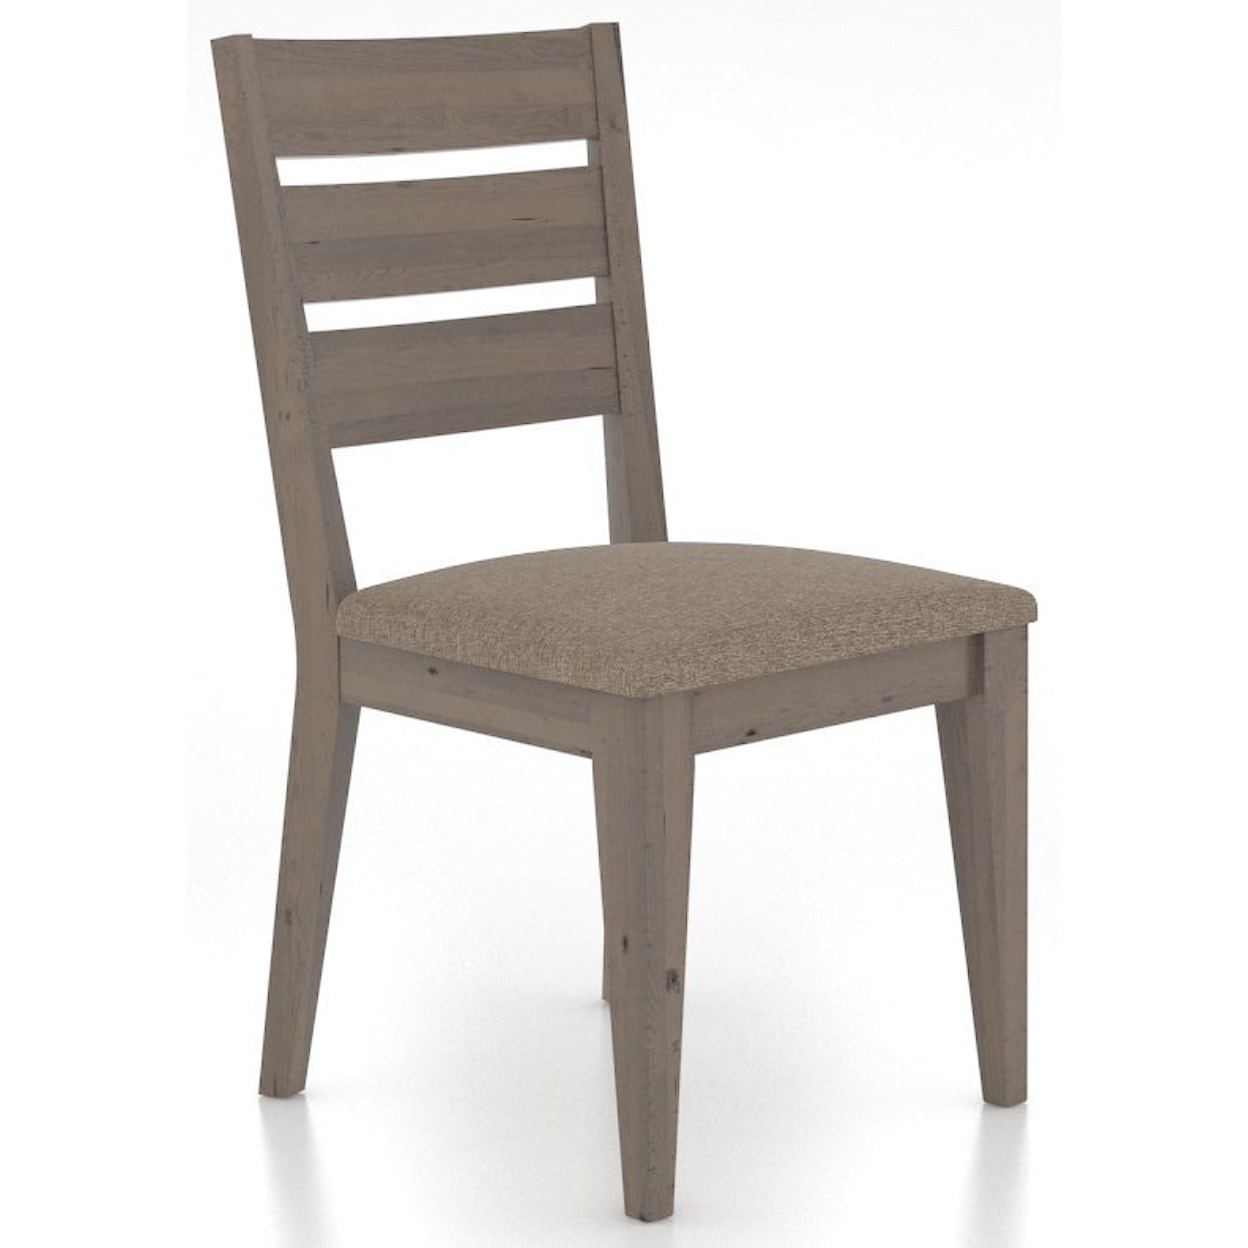 Canadel East Side Upholstered Dining Chair